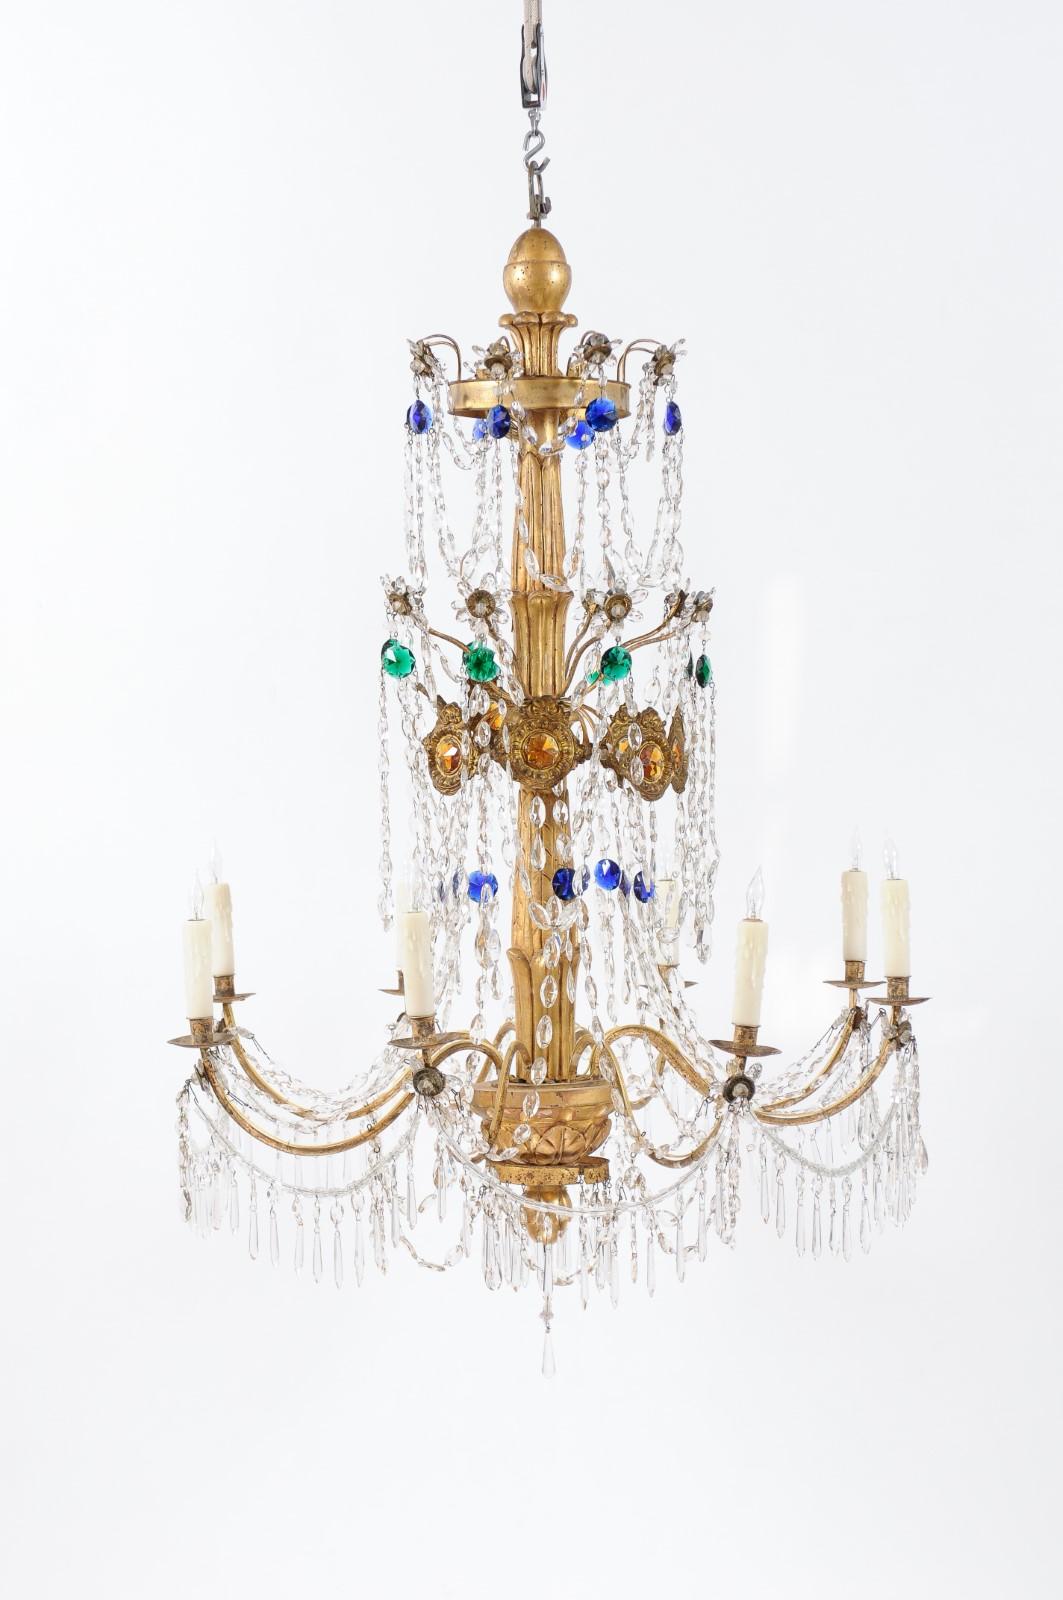 18th Century Italian Neoclassical Giltwood and Crystal 8-Light Chandelier, circa 1790